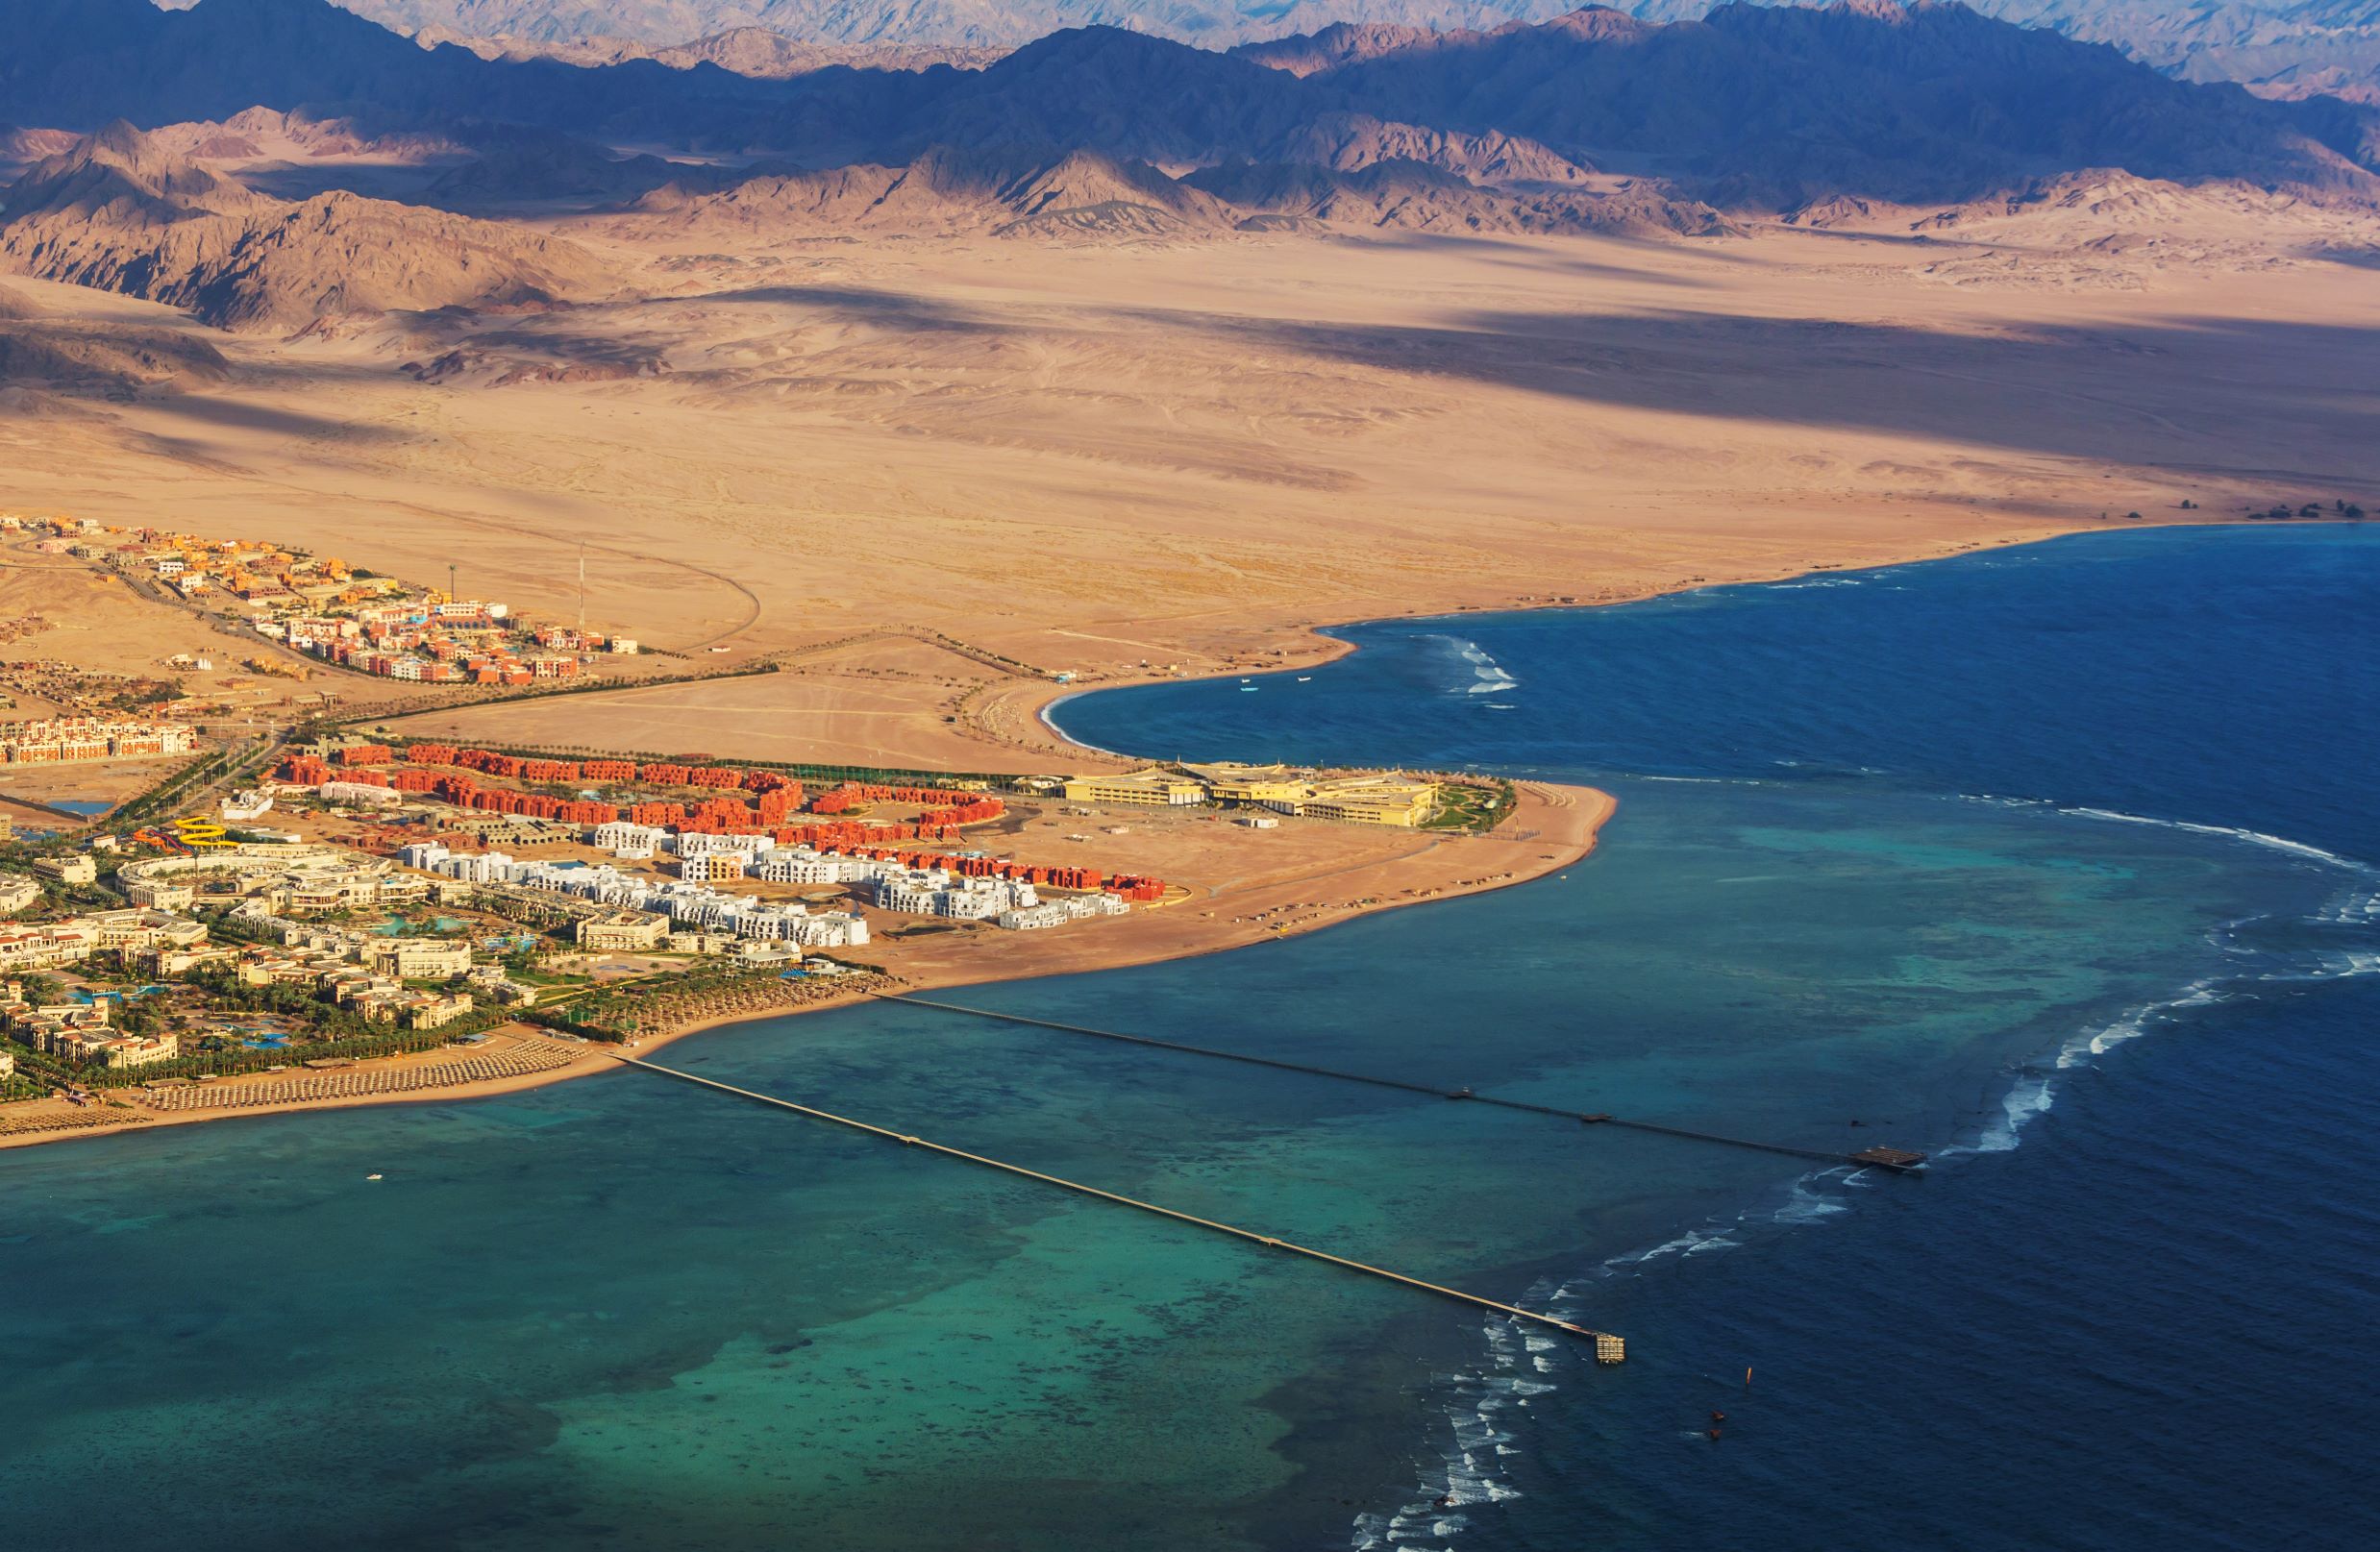 Sharm El Sheikh Travel Guide: Best activities and best places to visit